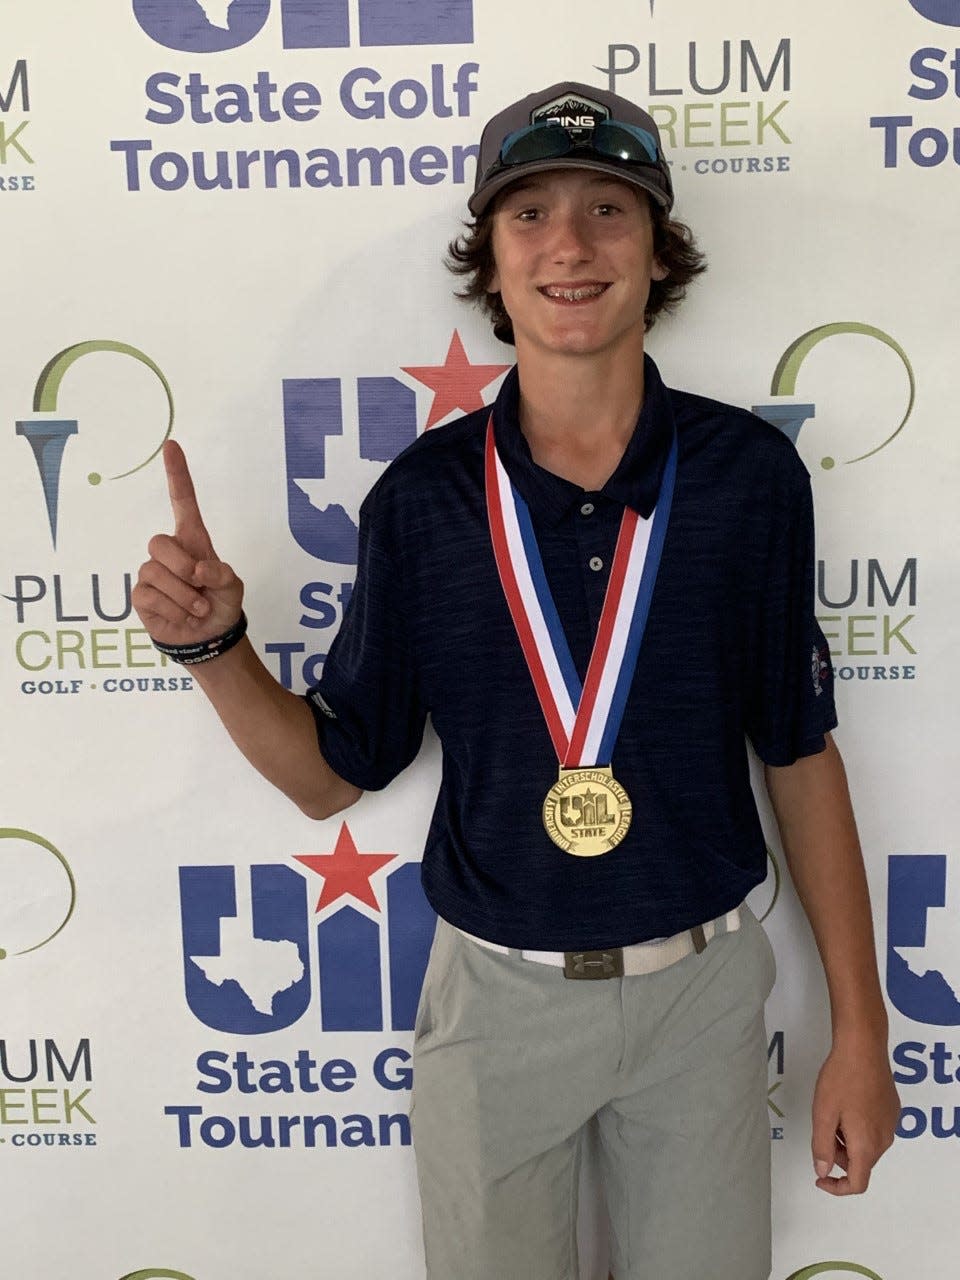 Jaxon Donaldson of Wimberley won his second Class 4A state golf championship last year. Now a senior, he hopes to close out his high school career with victory No. 3 this week in Kingsland.